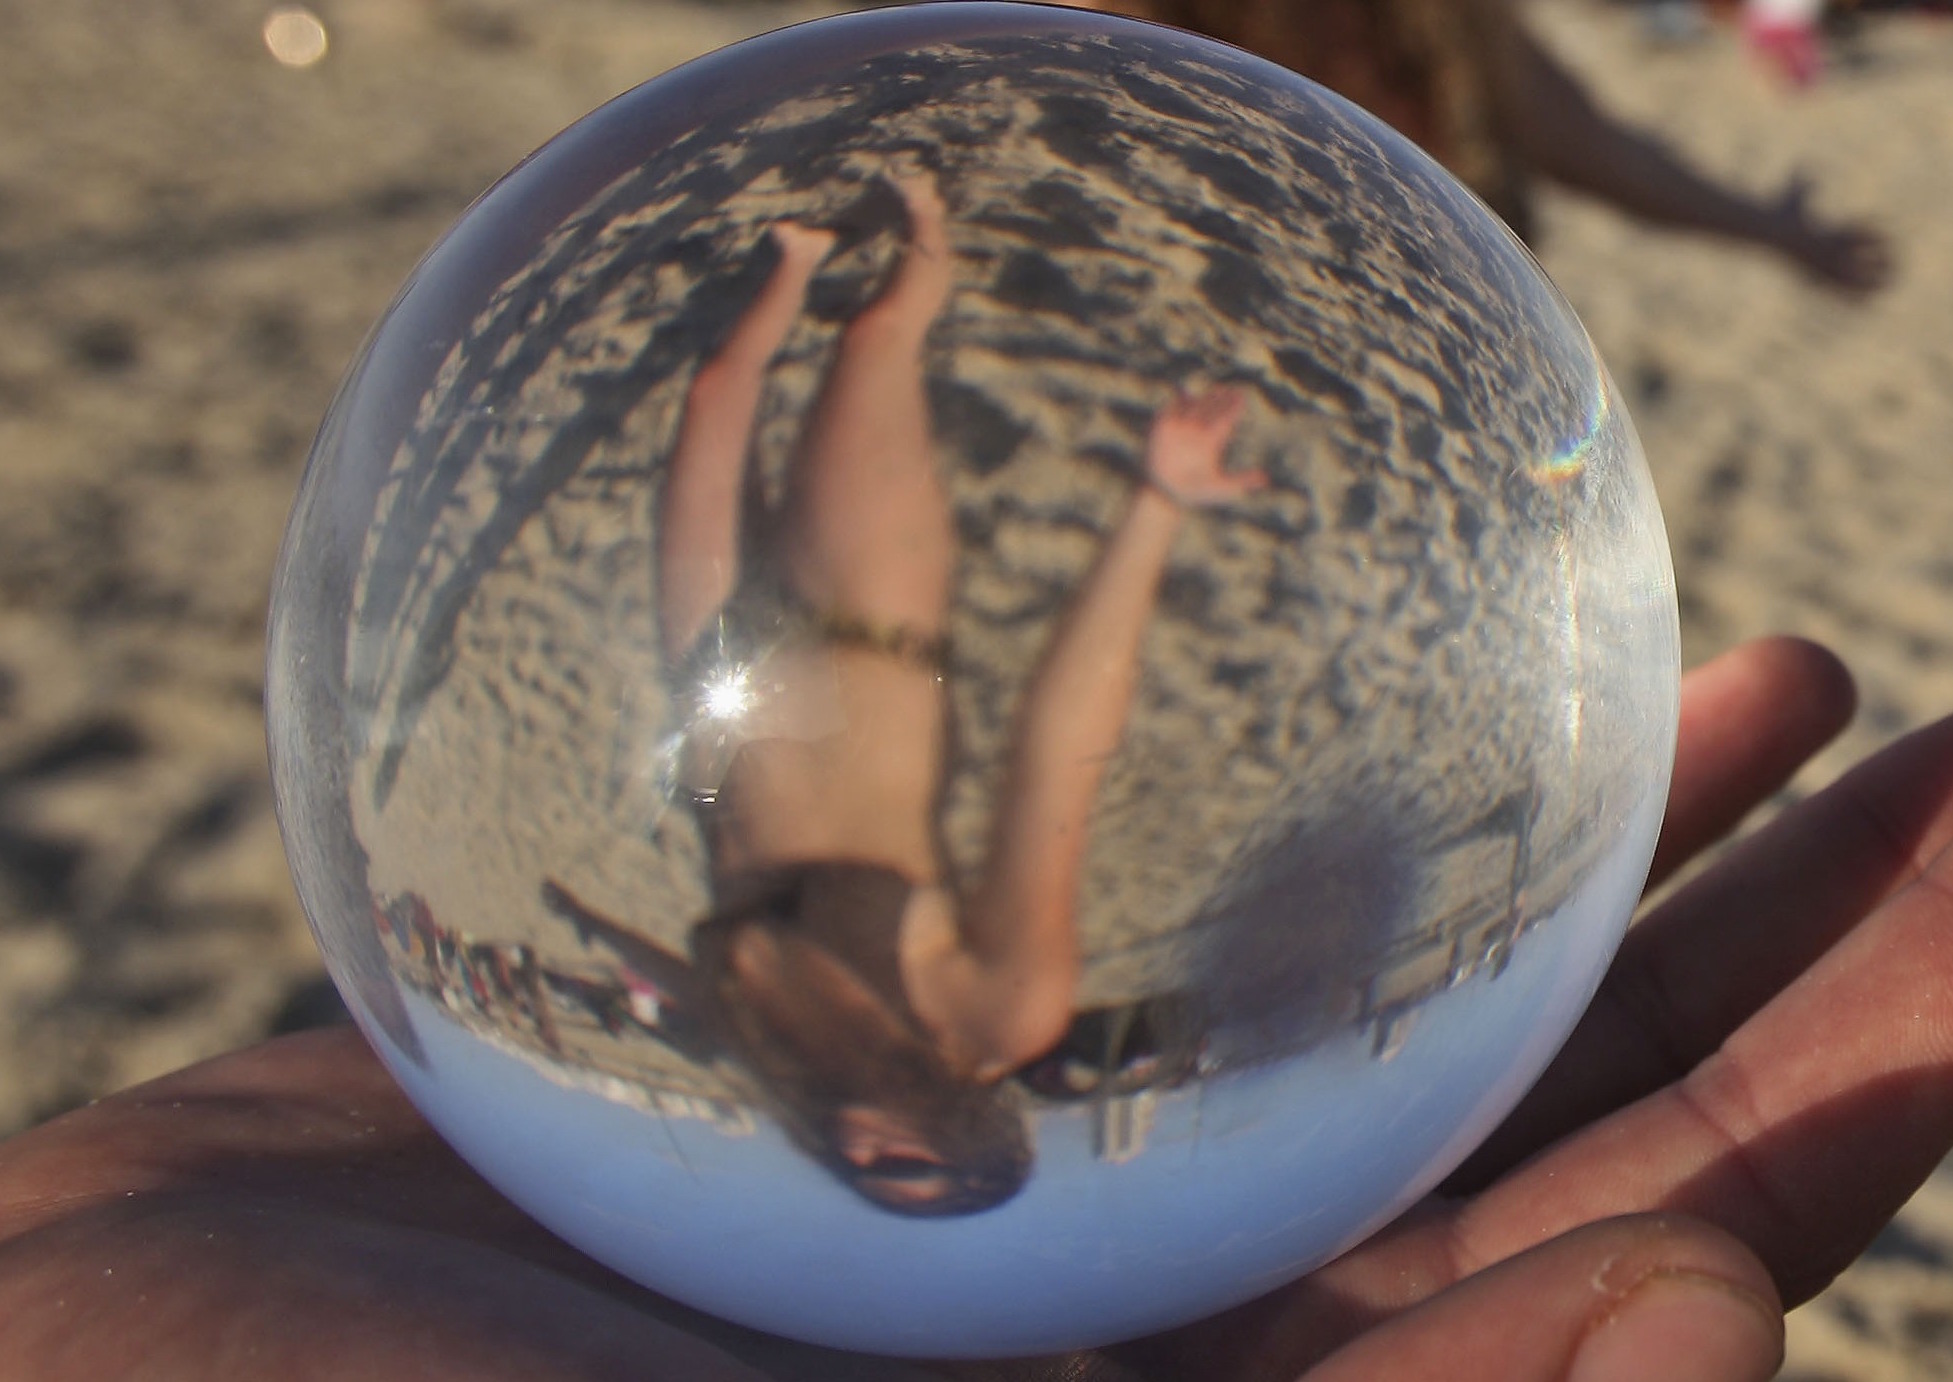 An Israeli man holds a crystal ball as others perform on the beach of the Israeli coastal city of Netanya Friday, May 1, 2009. More than 100 people gathered at the event which was held to promote "Love and Peace", organizers said. (AP Photo/Muhammed Muheisen)